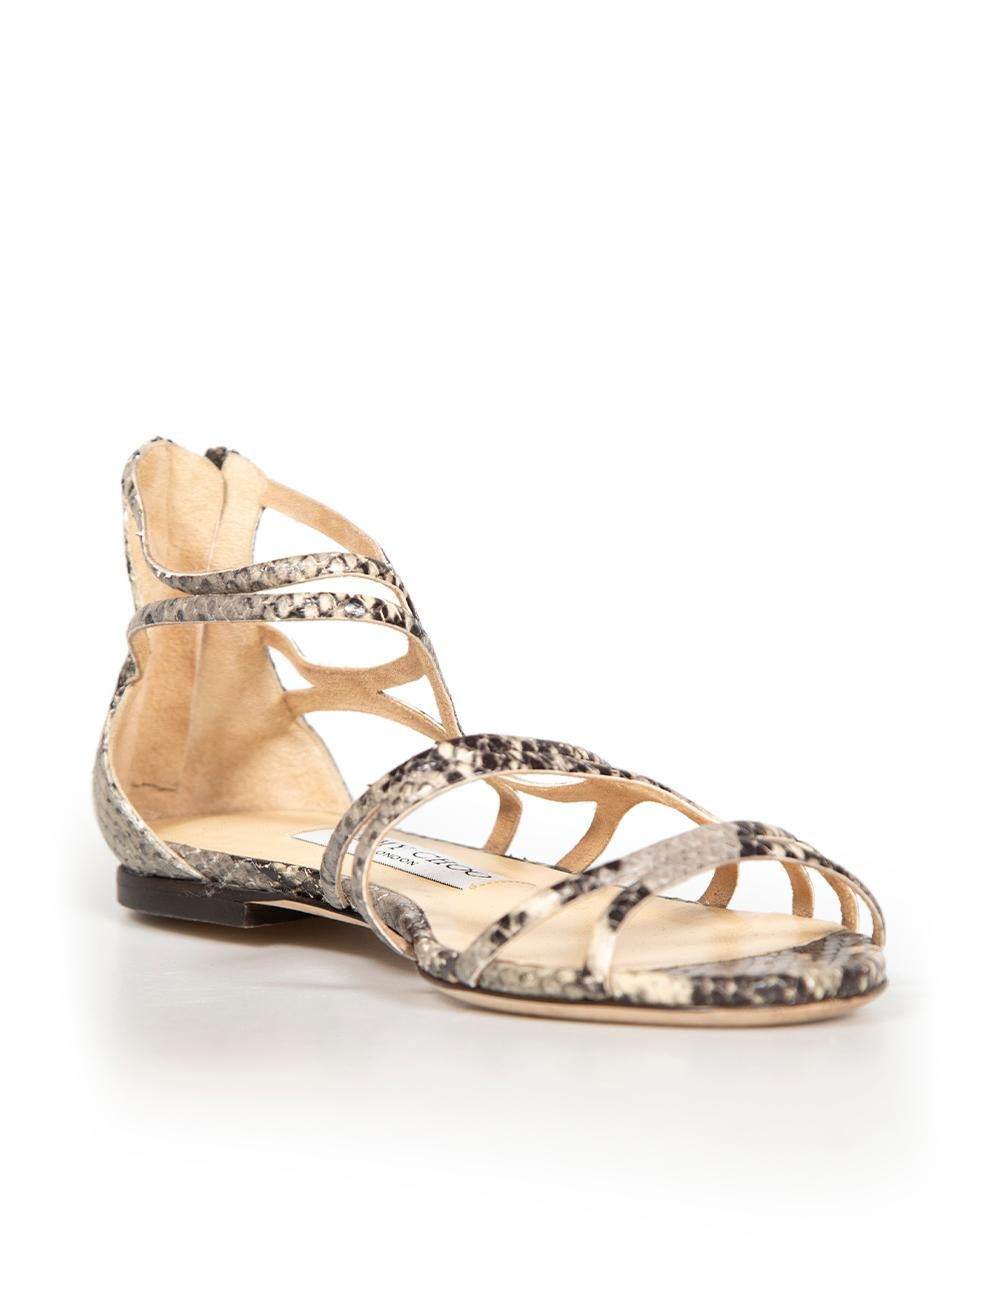 CONDITION is Very good. Minimal wear to sandals is evident. Minimal wear to soles on this used Jimmy Choo designer resale item.
 
 
 
 Details
 
 
 Sutri model
 
 Grey
 
 Snakeskin leather
 
 Strappy sandals
 
 Open toe
 
 Flat heel
 
 Back zip